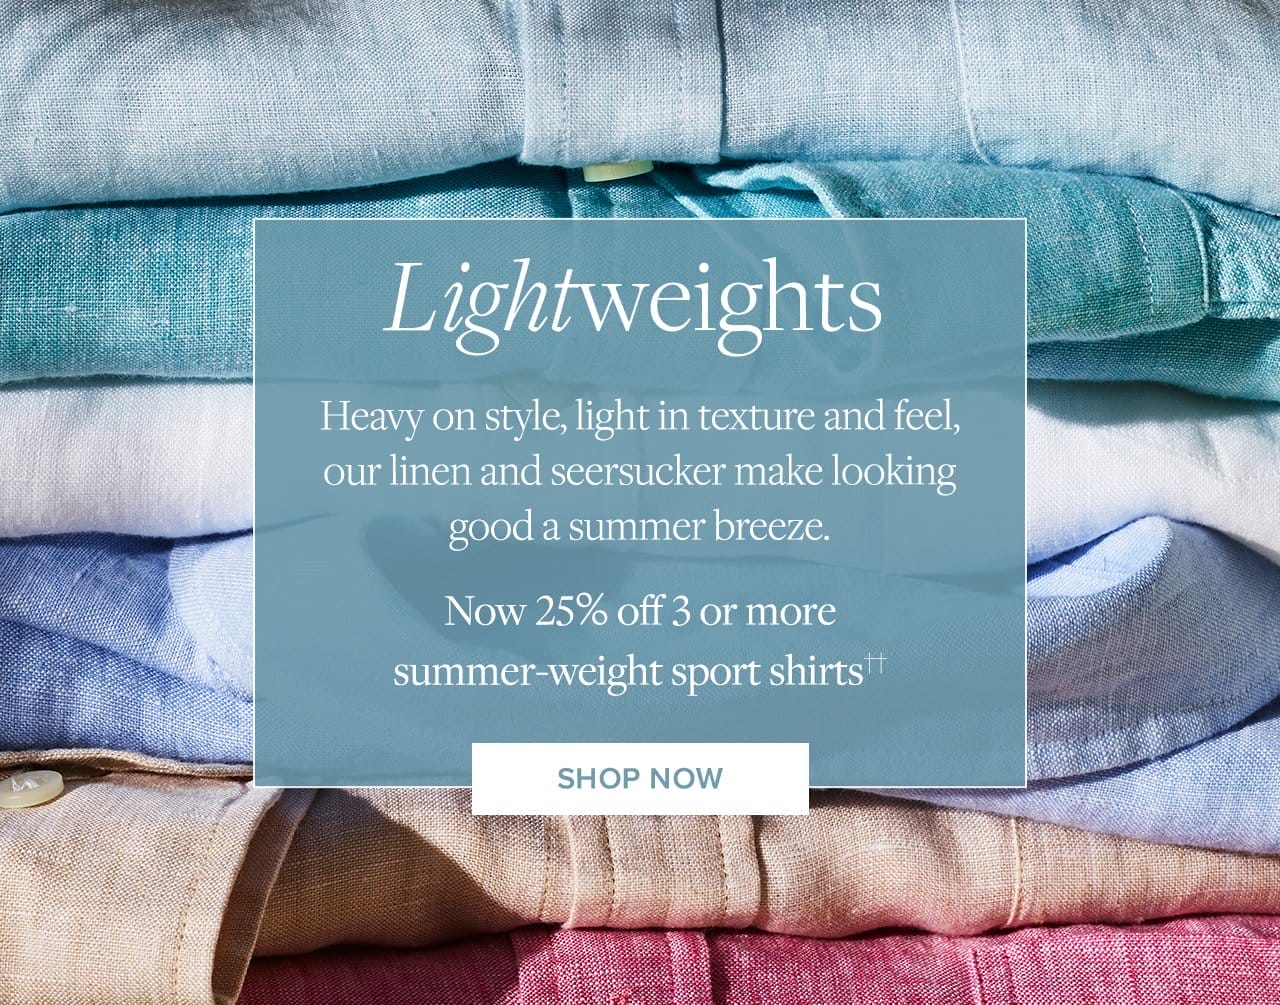 Lightweights Heavy on style, light in texture and feel, our linen and seersucker make looking good a summer breeze. Now 25% off 3 or more summer-weight sport shirts Shop Now